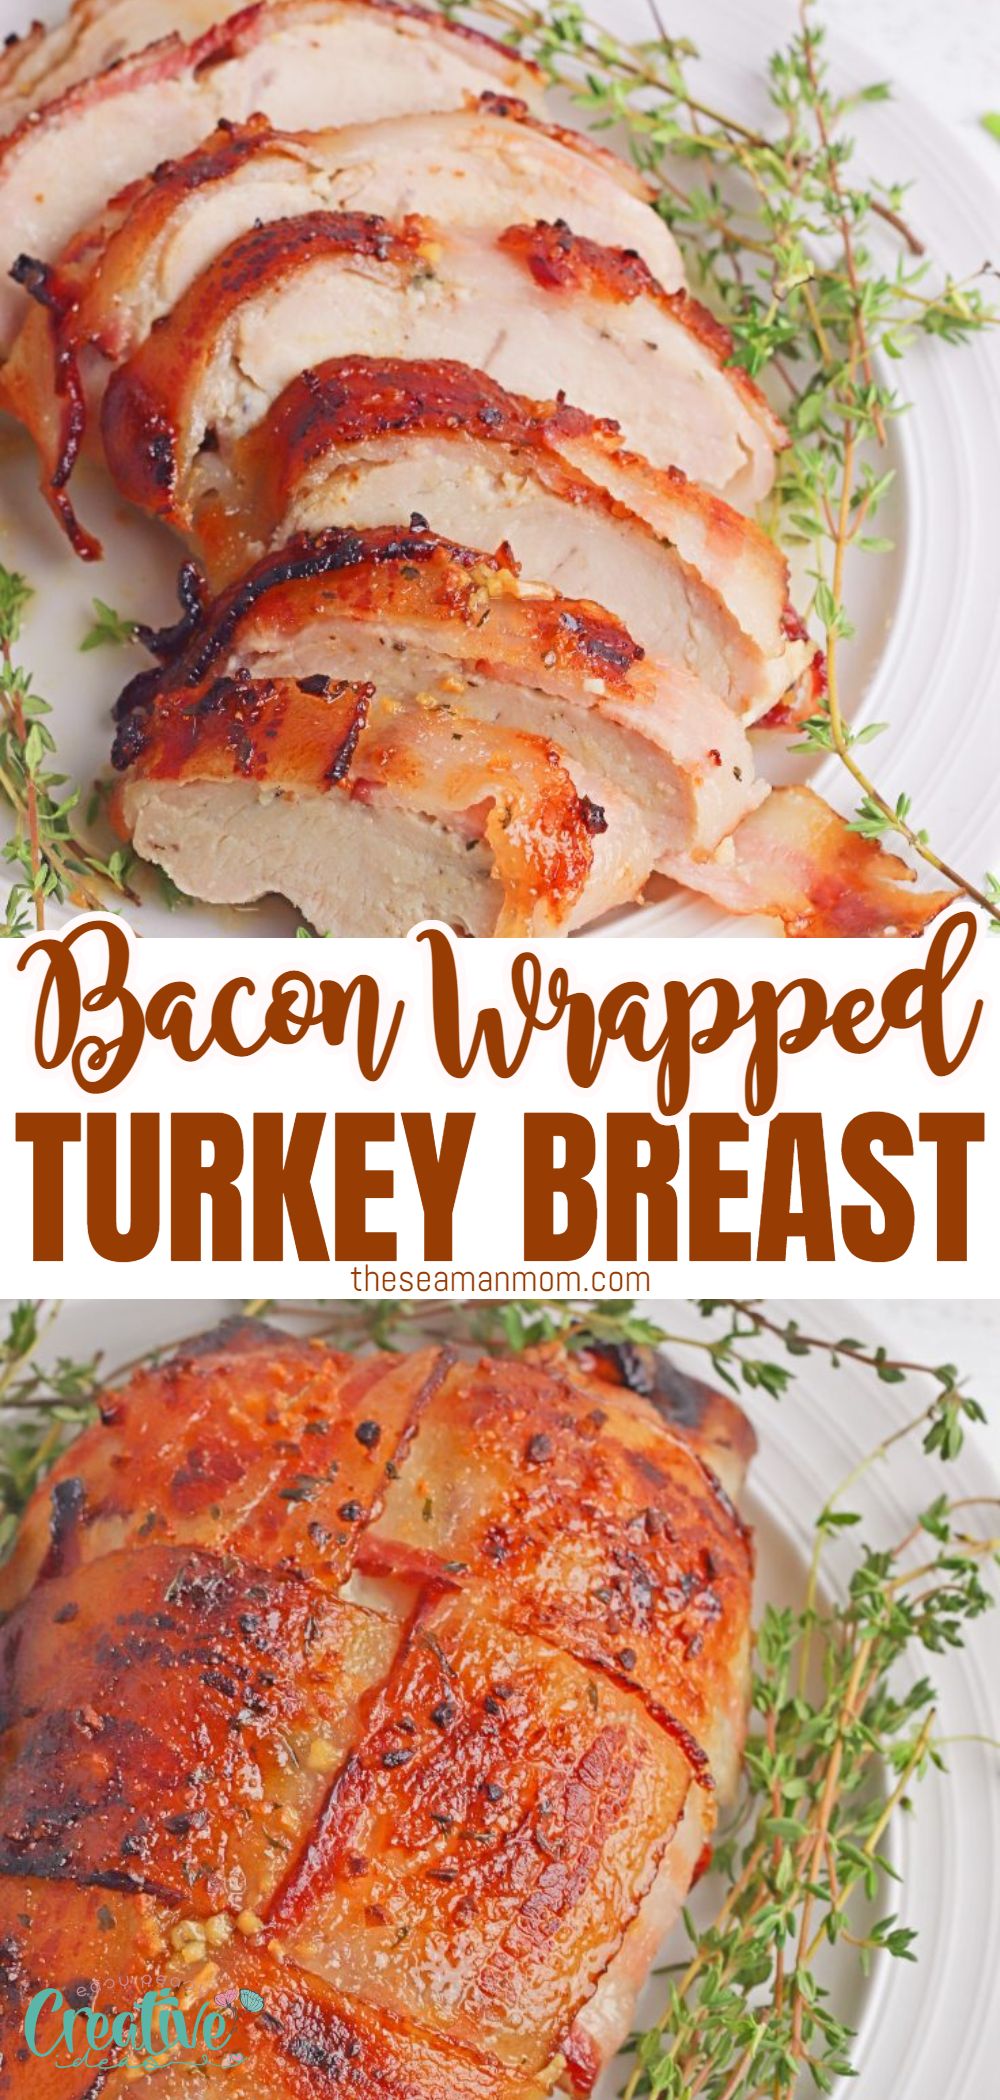 You've got to try this fabulous bacon wrapped turkey breast! A lip-smacking crowd-pleaser recipe, perfect for your Thanksgiving dinner, this bacon wrapped turkey recipe works best if you don't host a big party! via @petroneagu